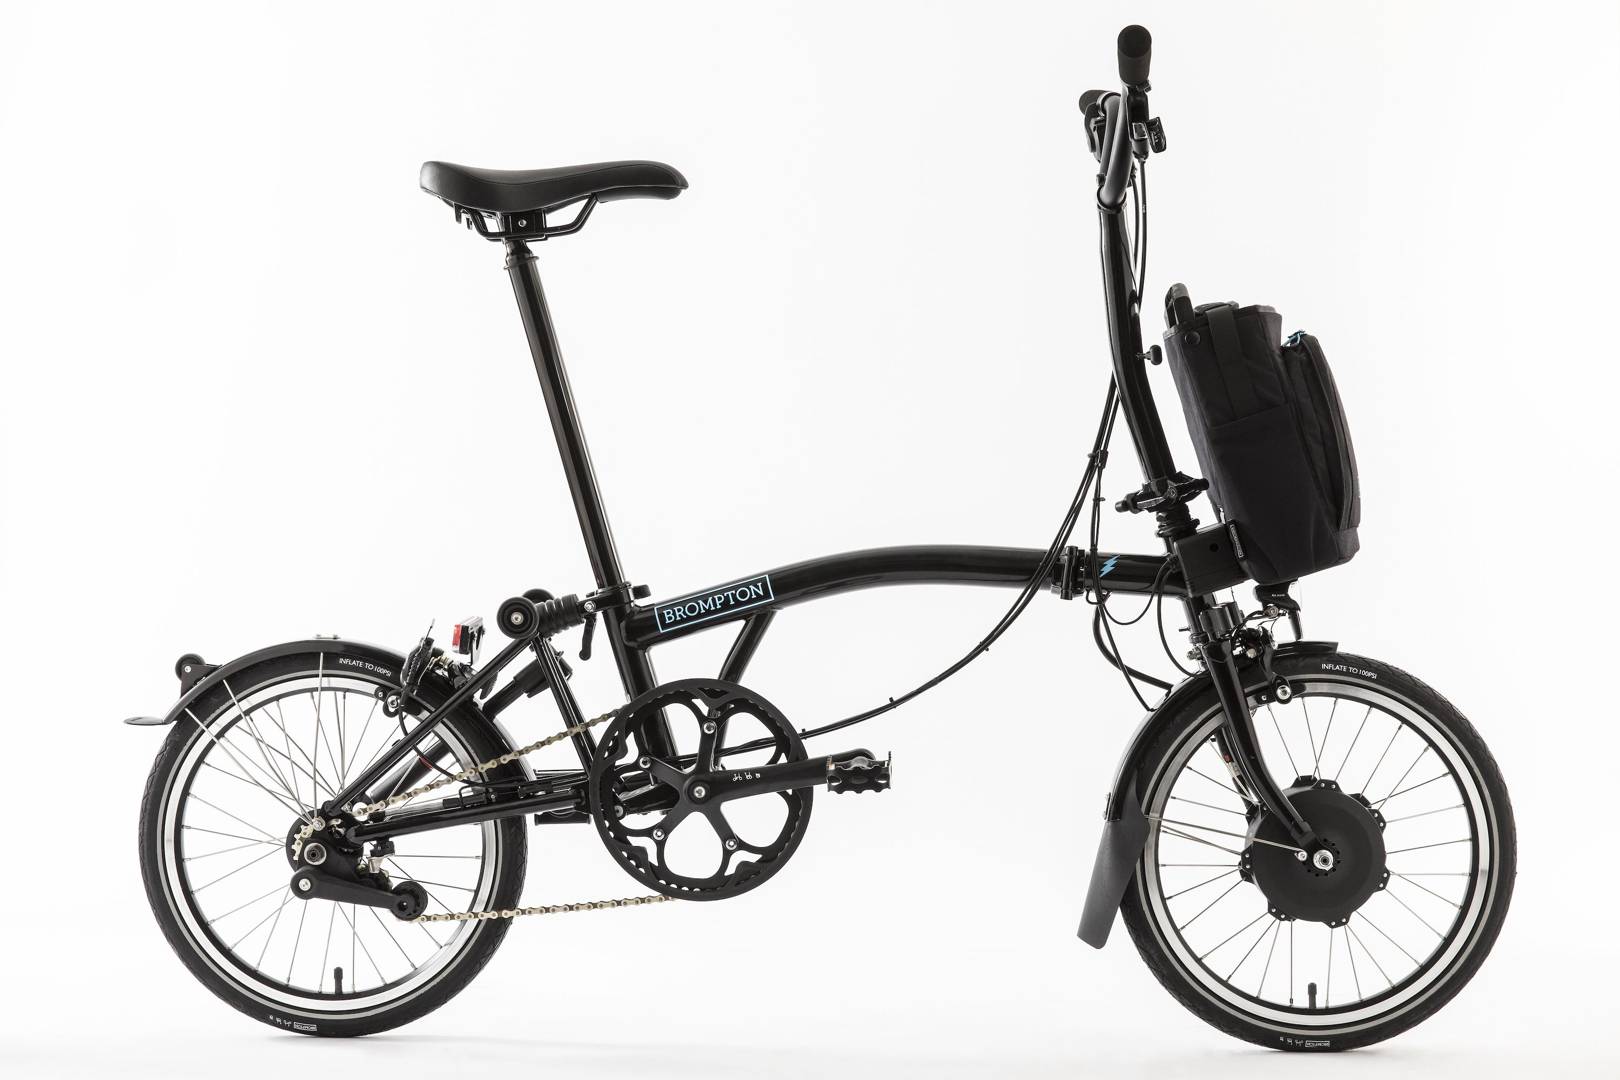 Brompton's gone electric: WIRED takes new battery-powered folding bike for a test ride